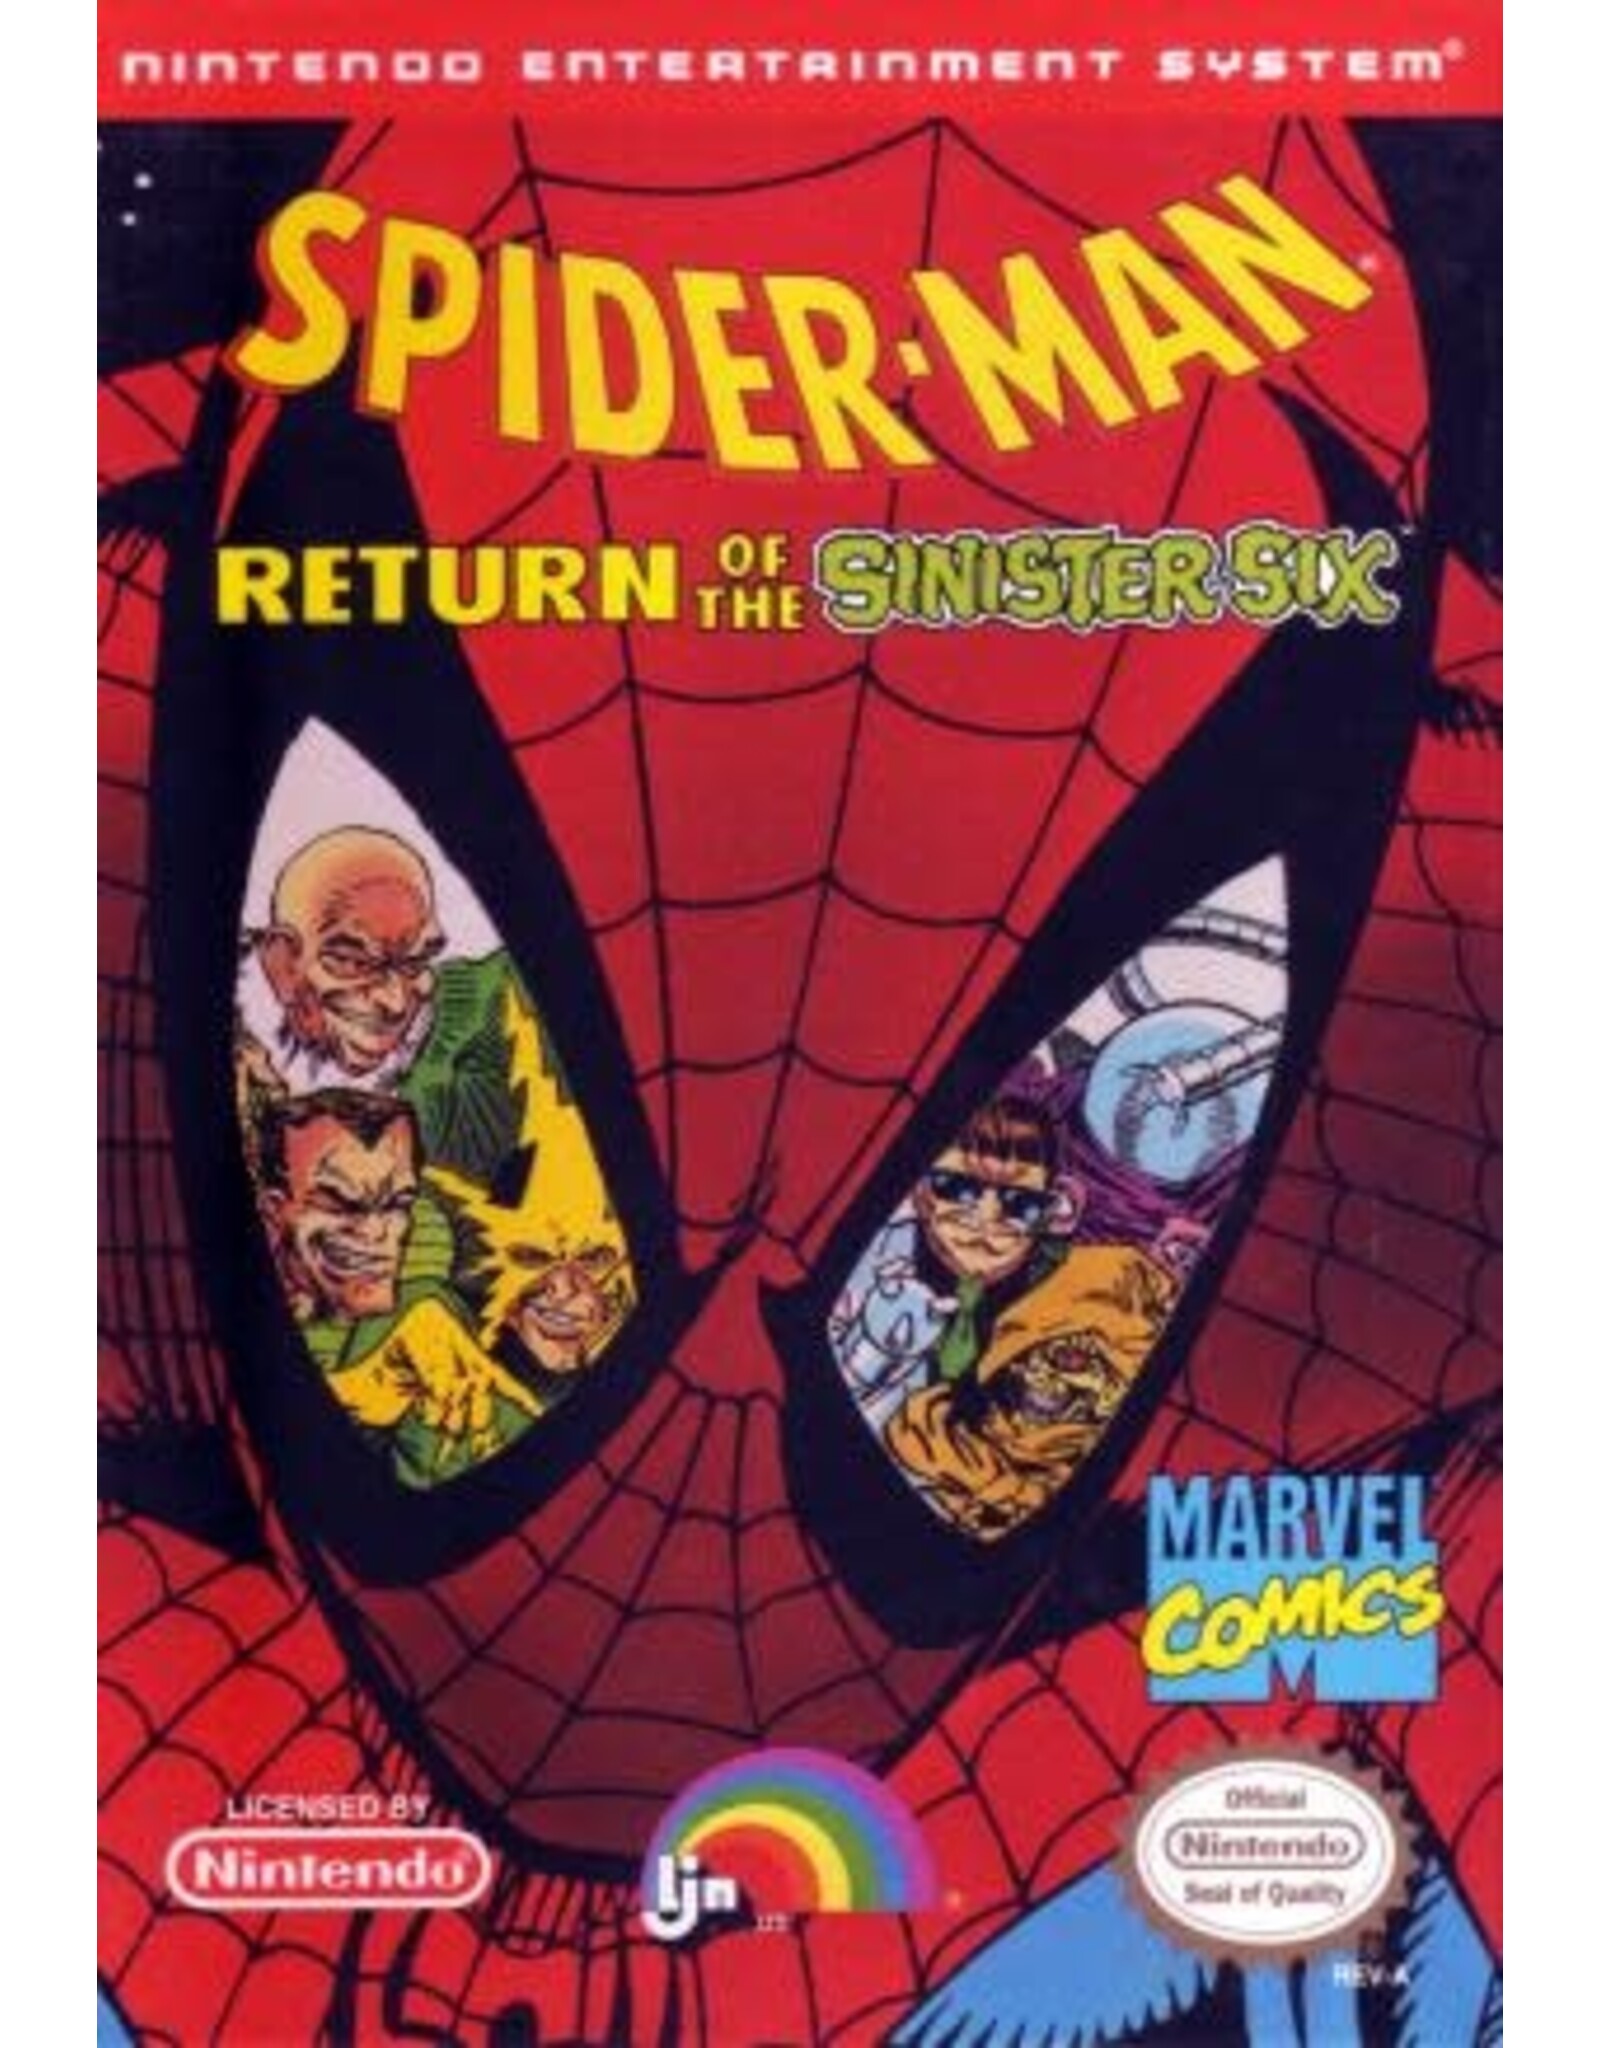 NES Spiderman Return of the Sinister Six (Boxed, No Manual, Heavily Damaged Box)